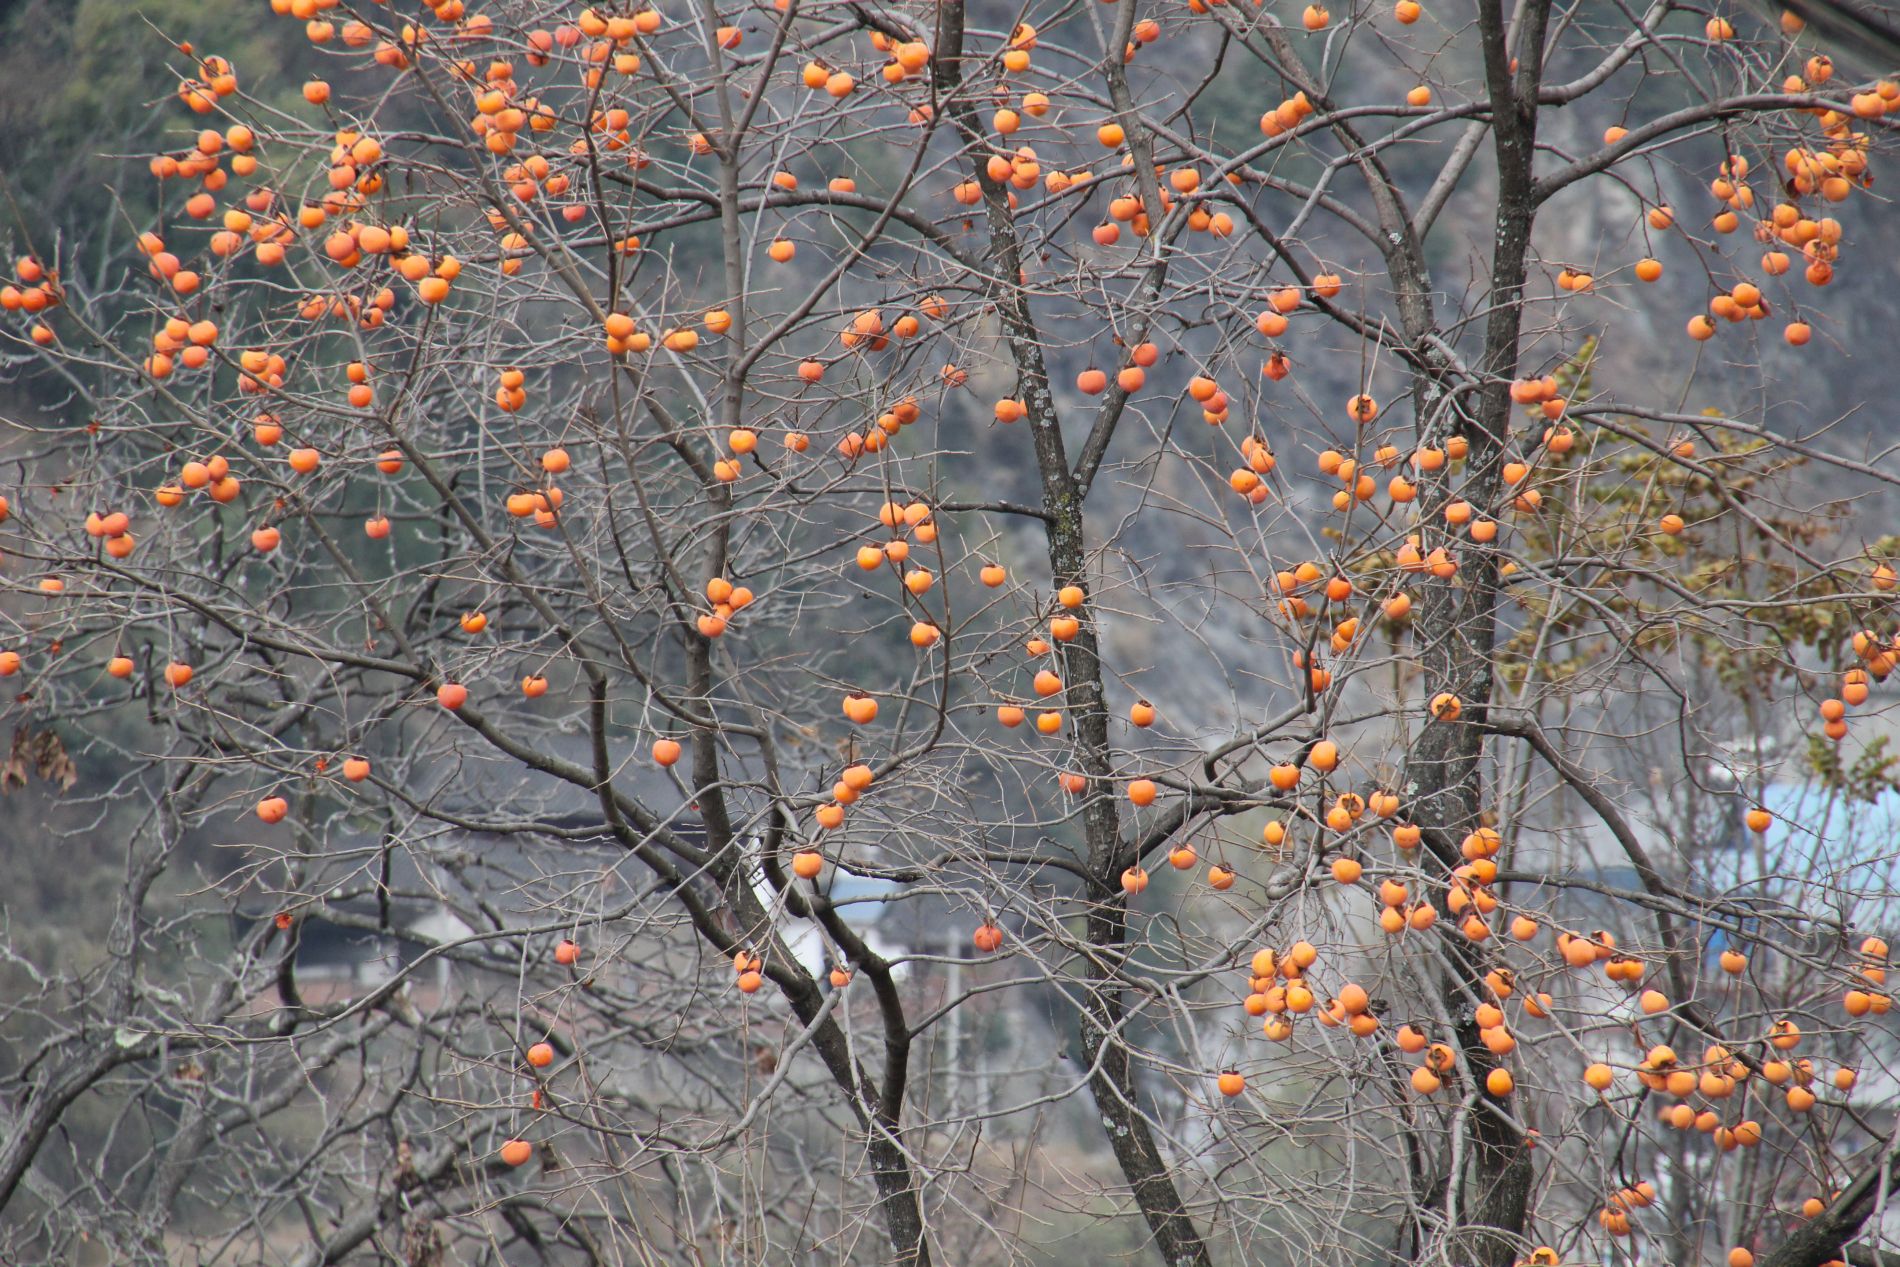 A kumquat tree in China's Tiger Leaping Gorge